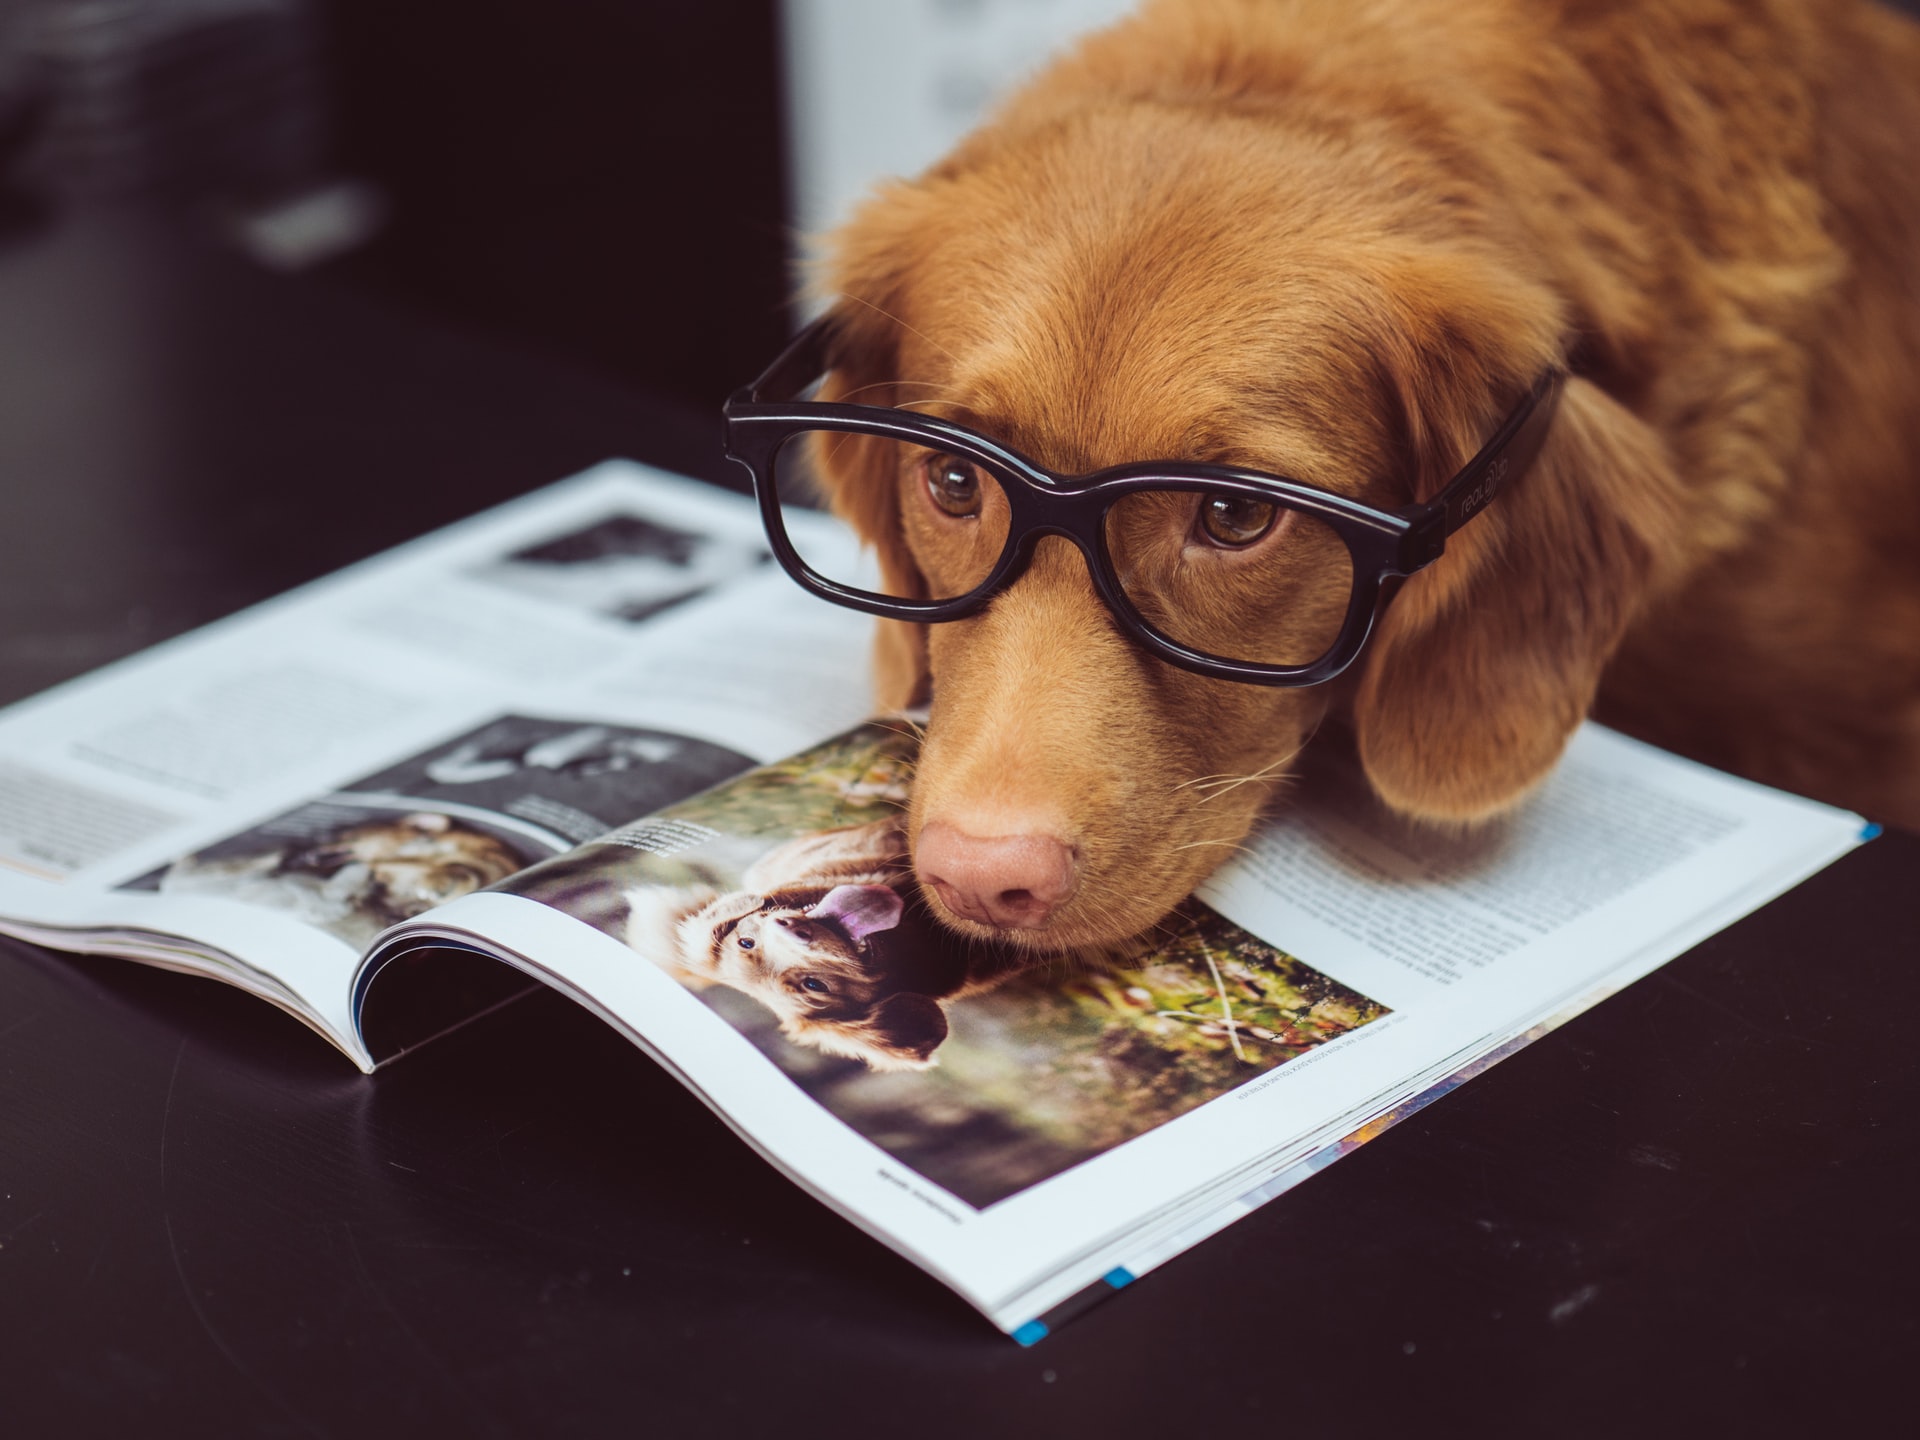 Is your dog actually smart? Depends on its memory.